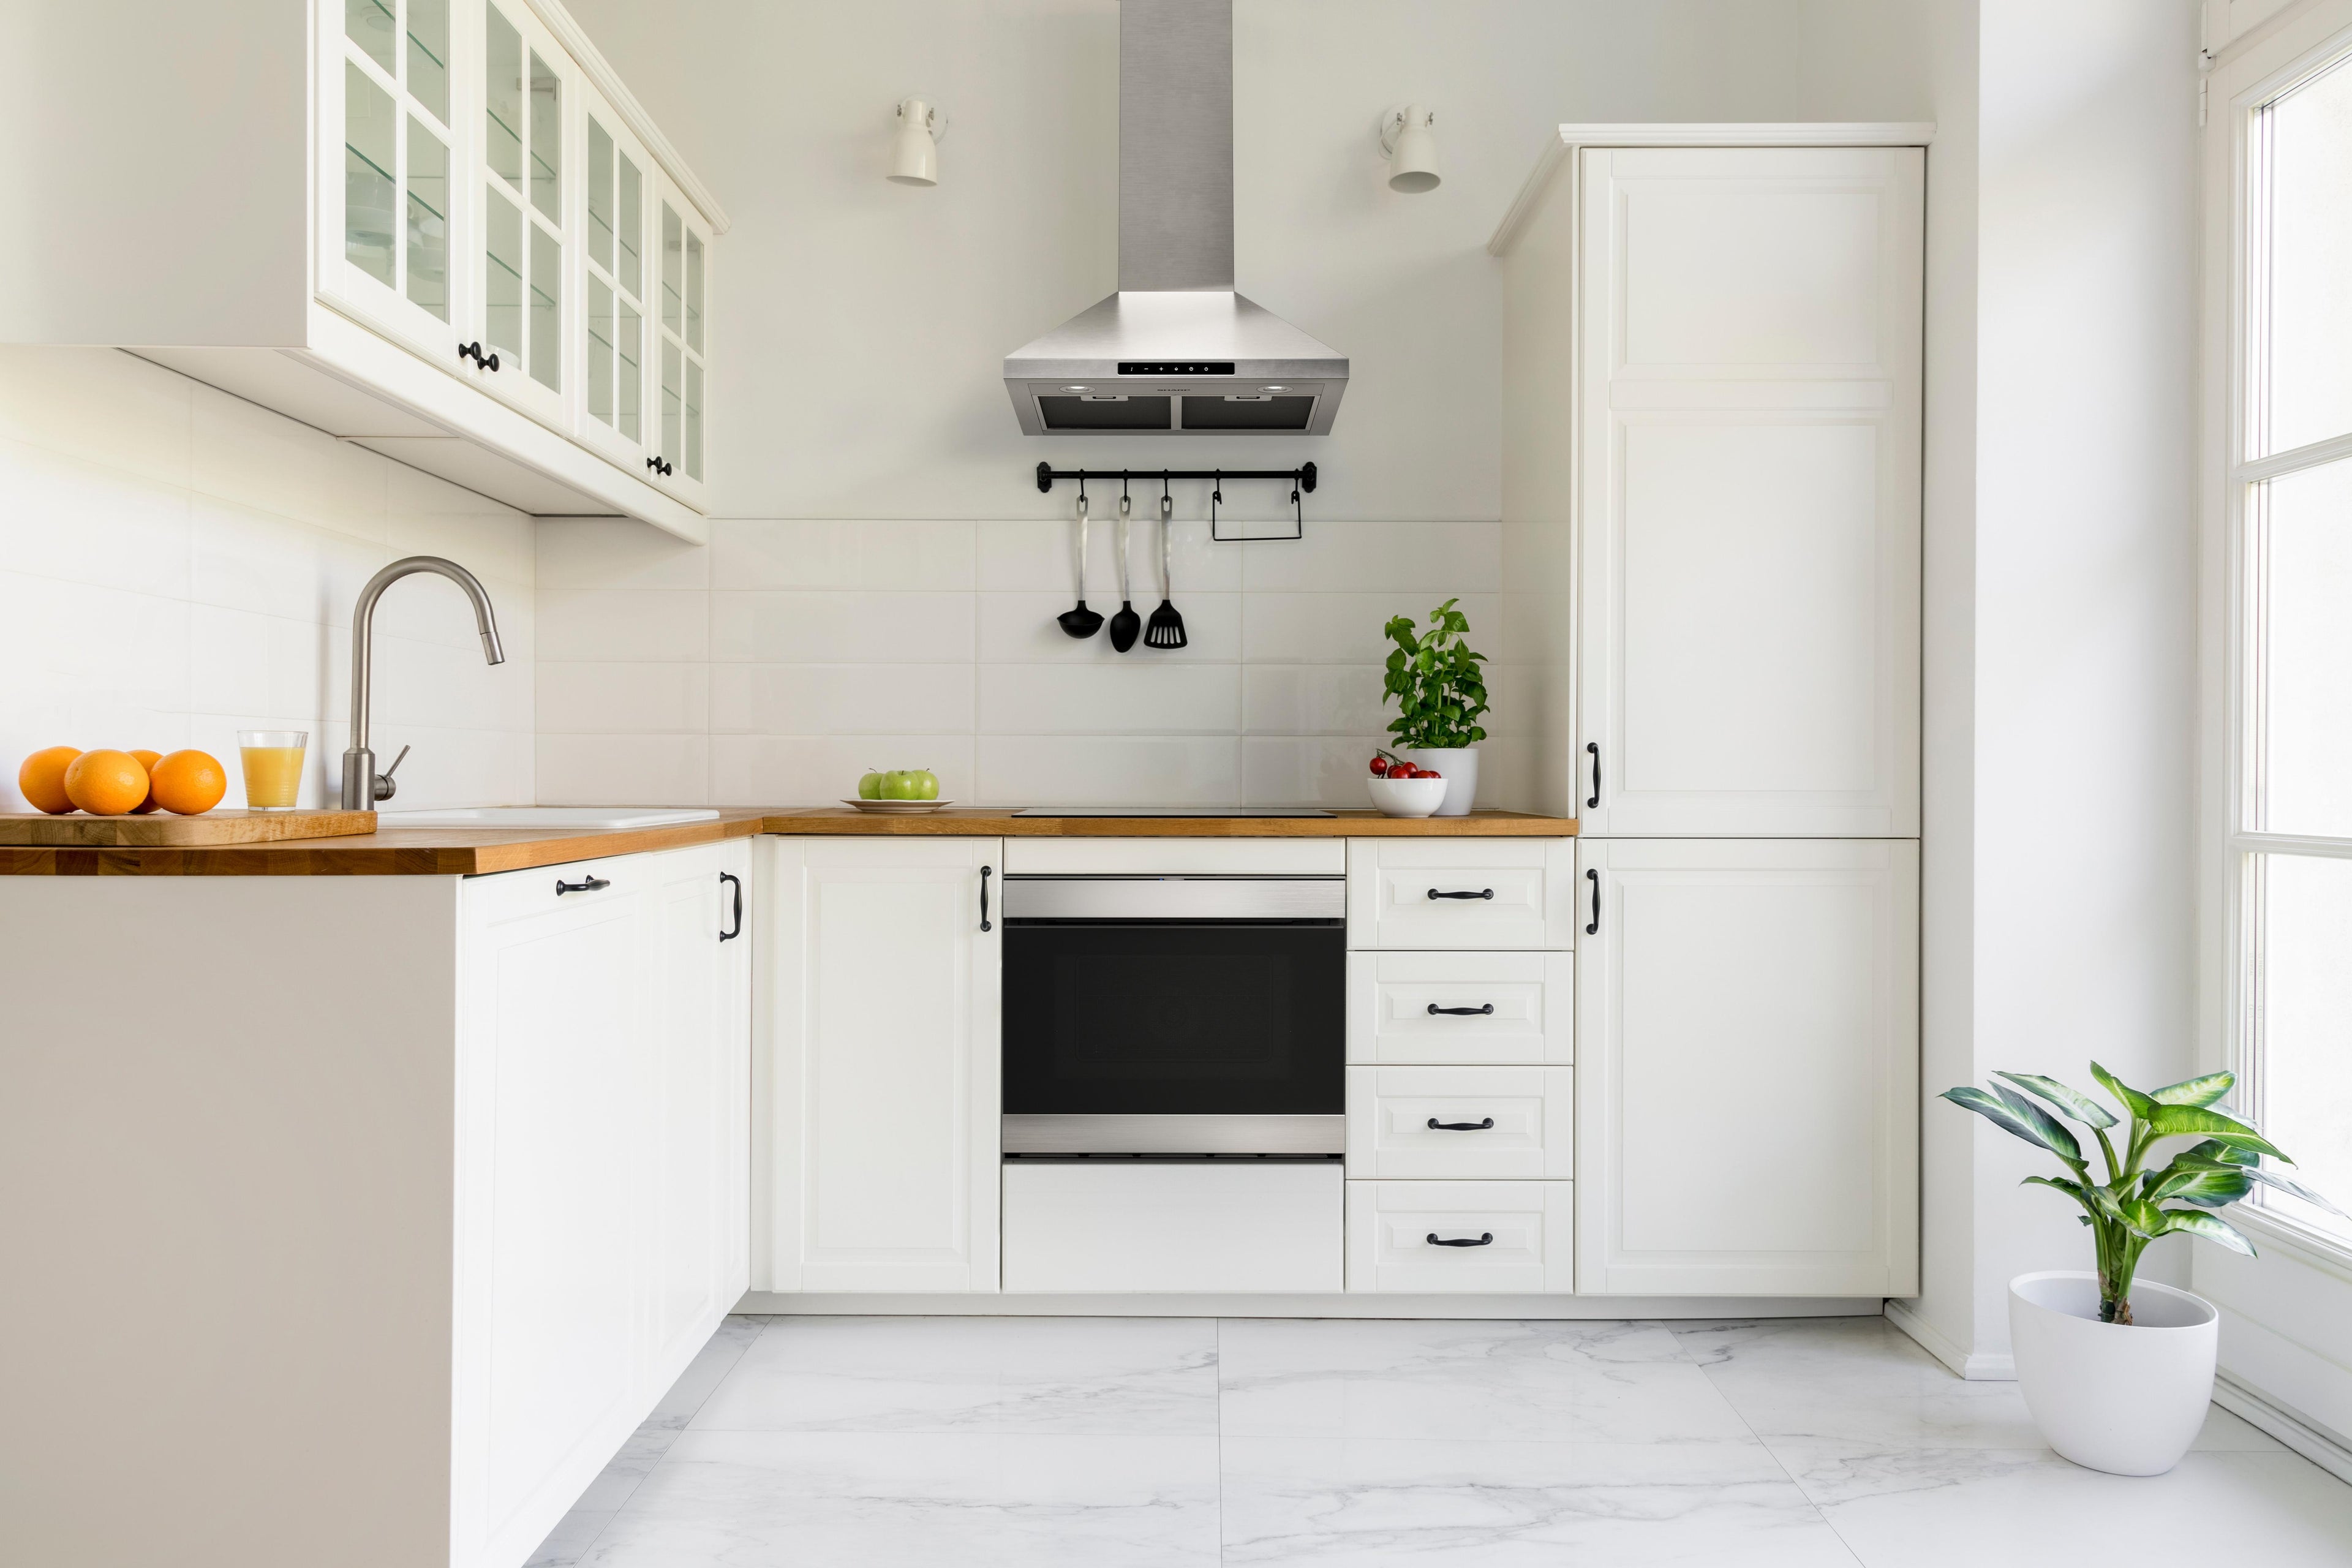 Find The Perfect Kitchen Hood Range For The Way You Cook